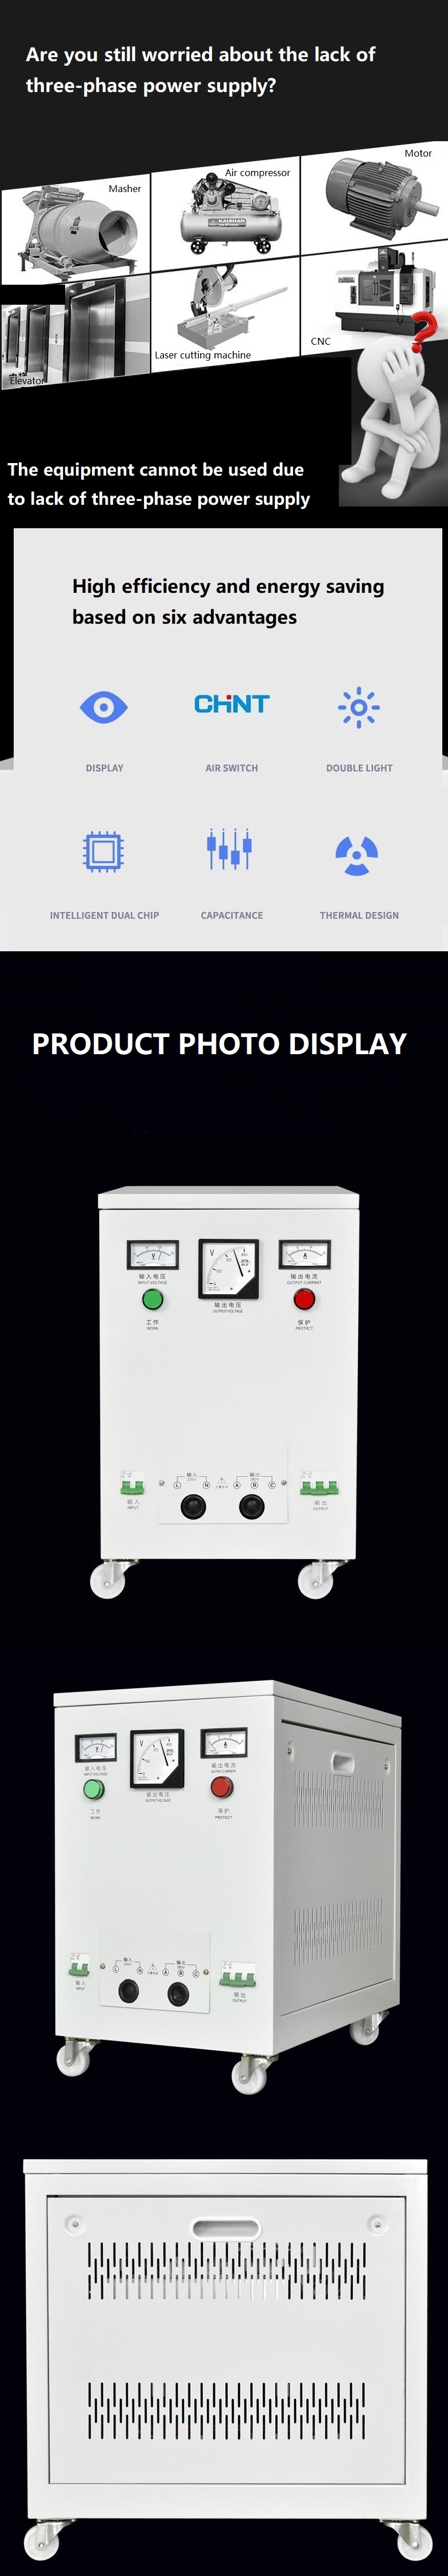 Converter Detail Page